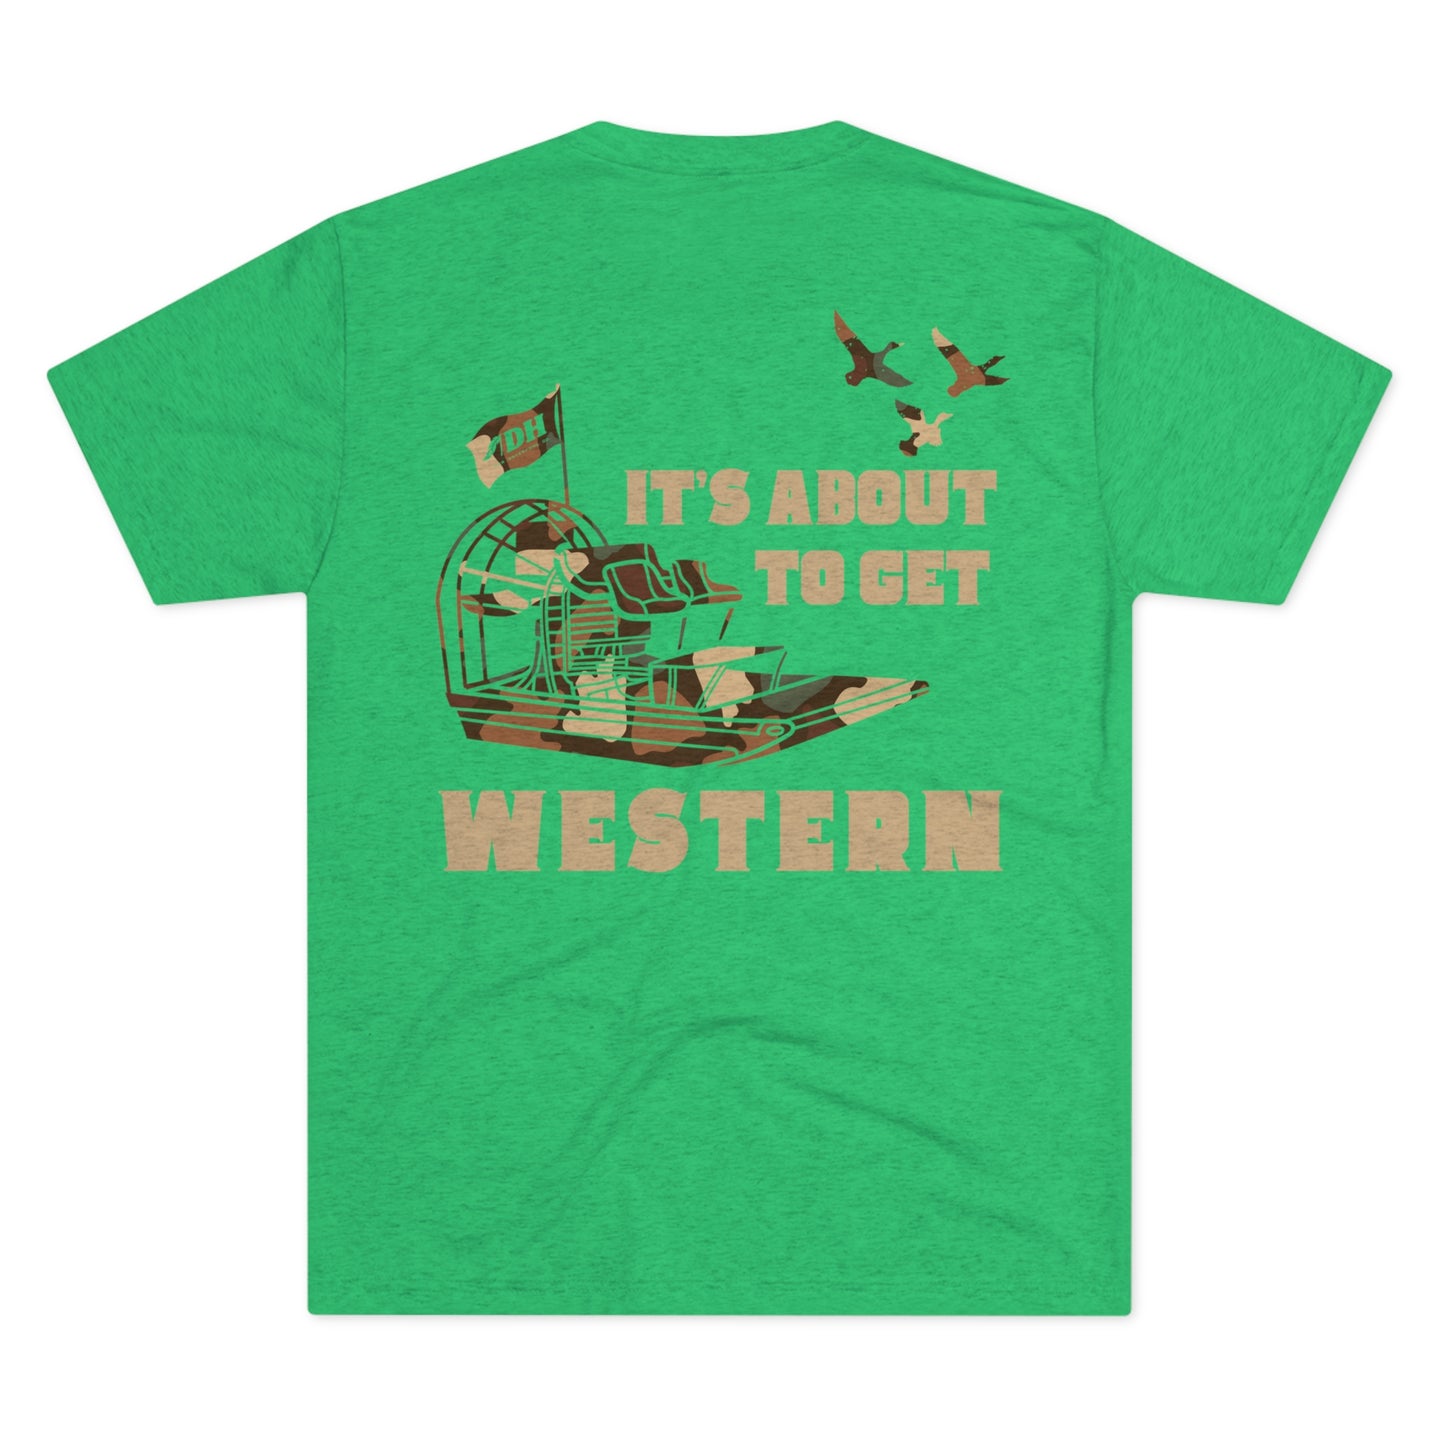 IT'S ABOUT TO GET WESTERN Tee (Multiple Color Options)